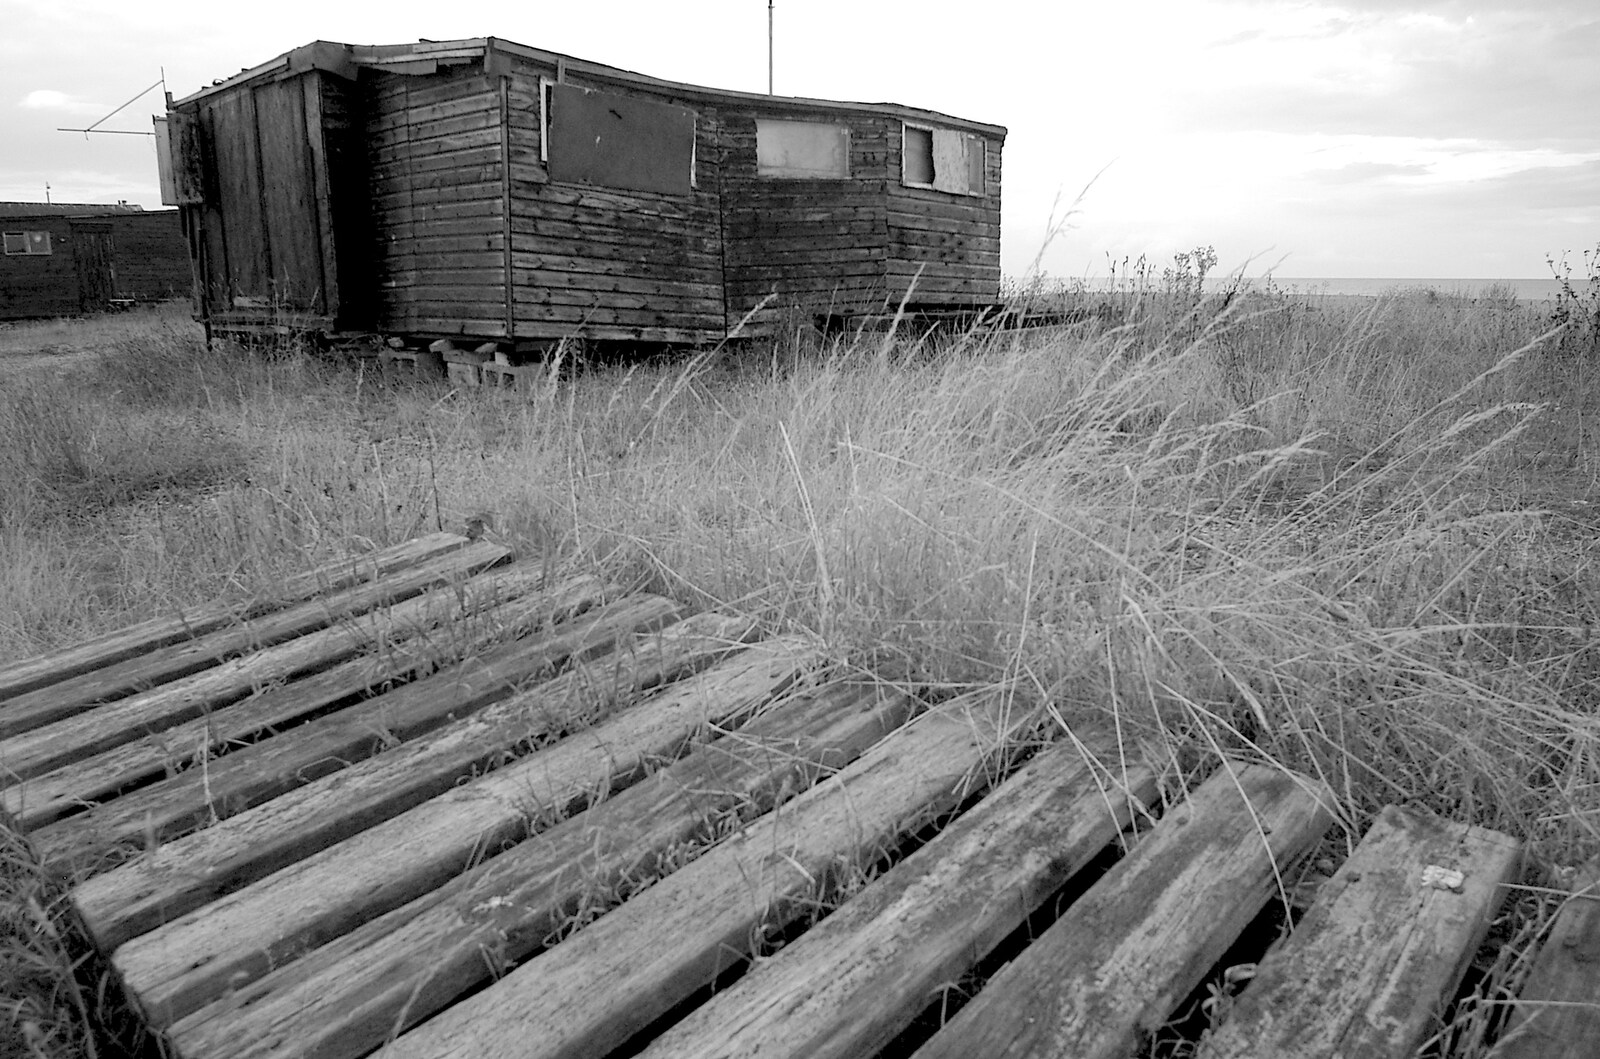 Derelict shed and boardwalk from The Regatta Restaurant with Mother and Mike, Aldeburgh, Suffolk - 10th August 2006